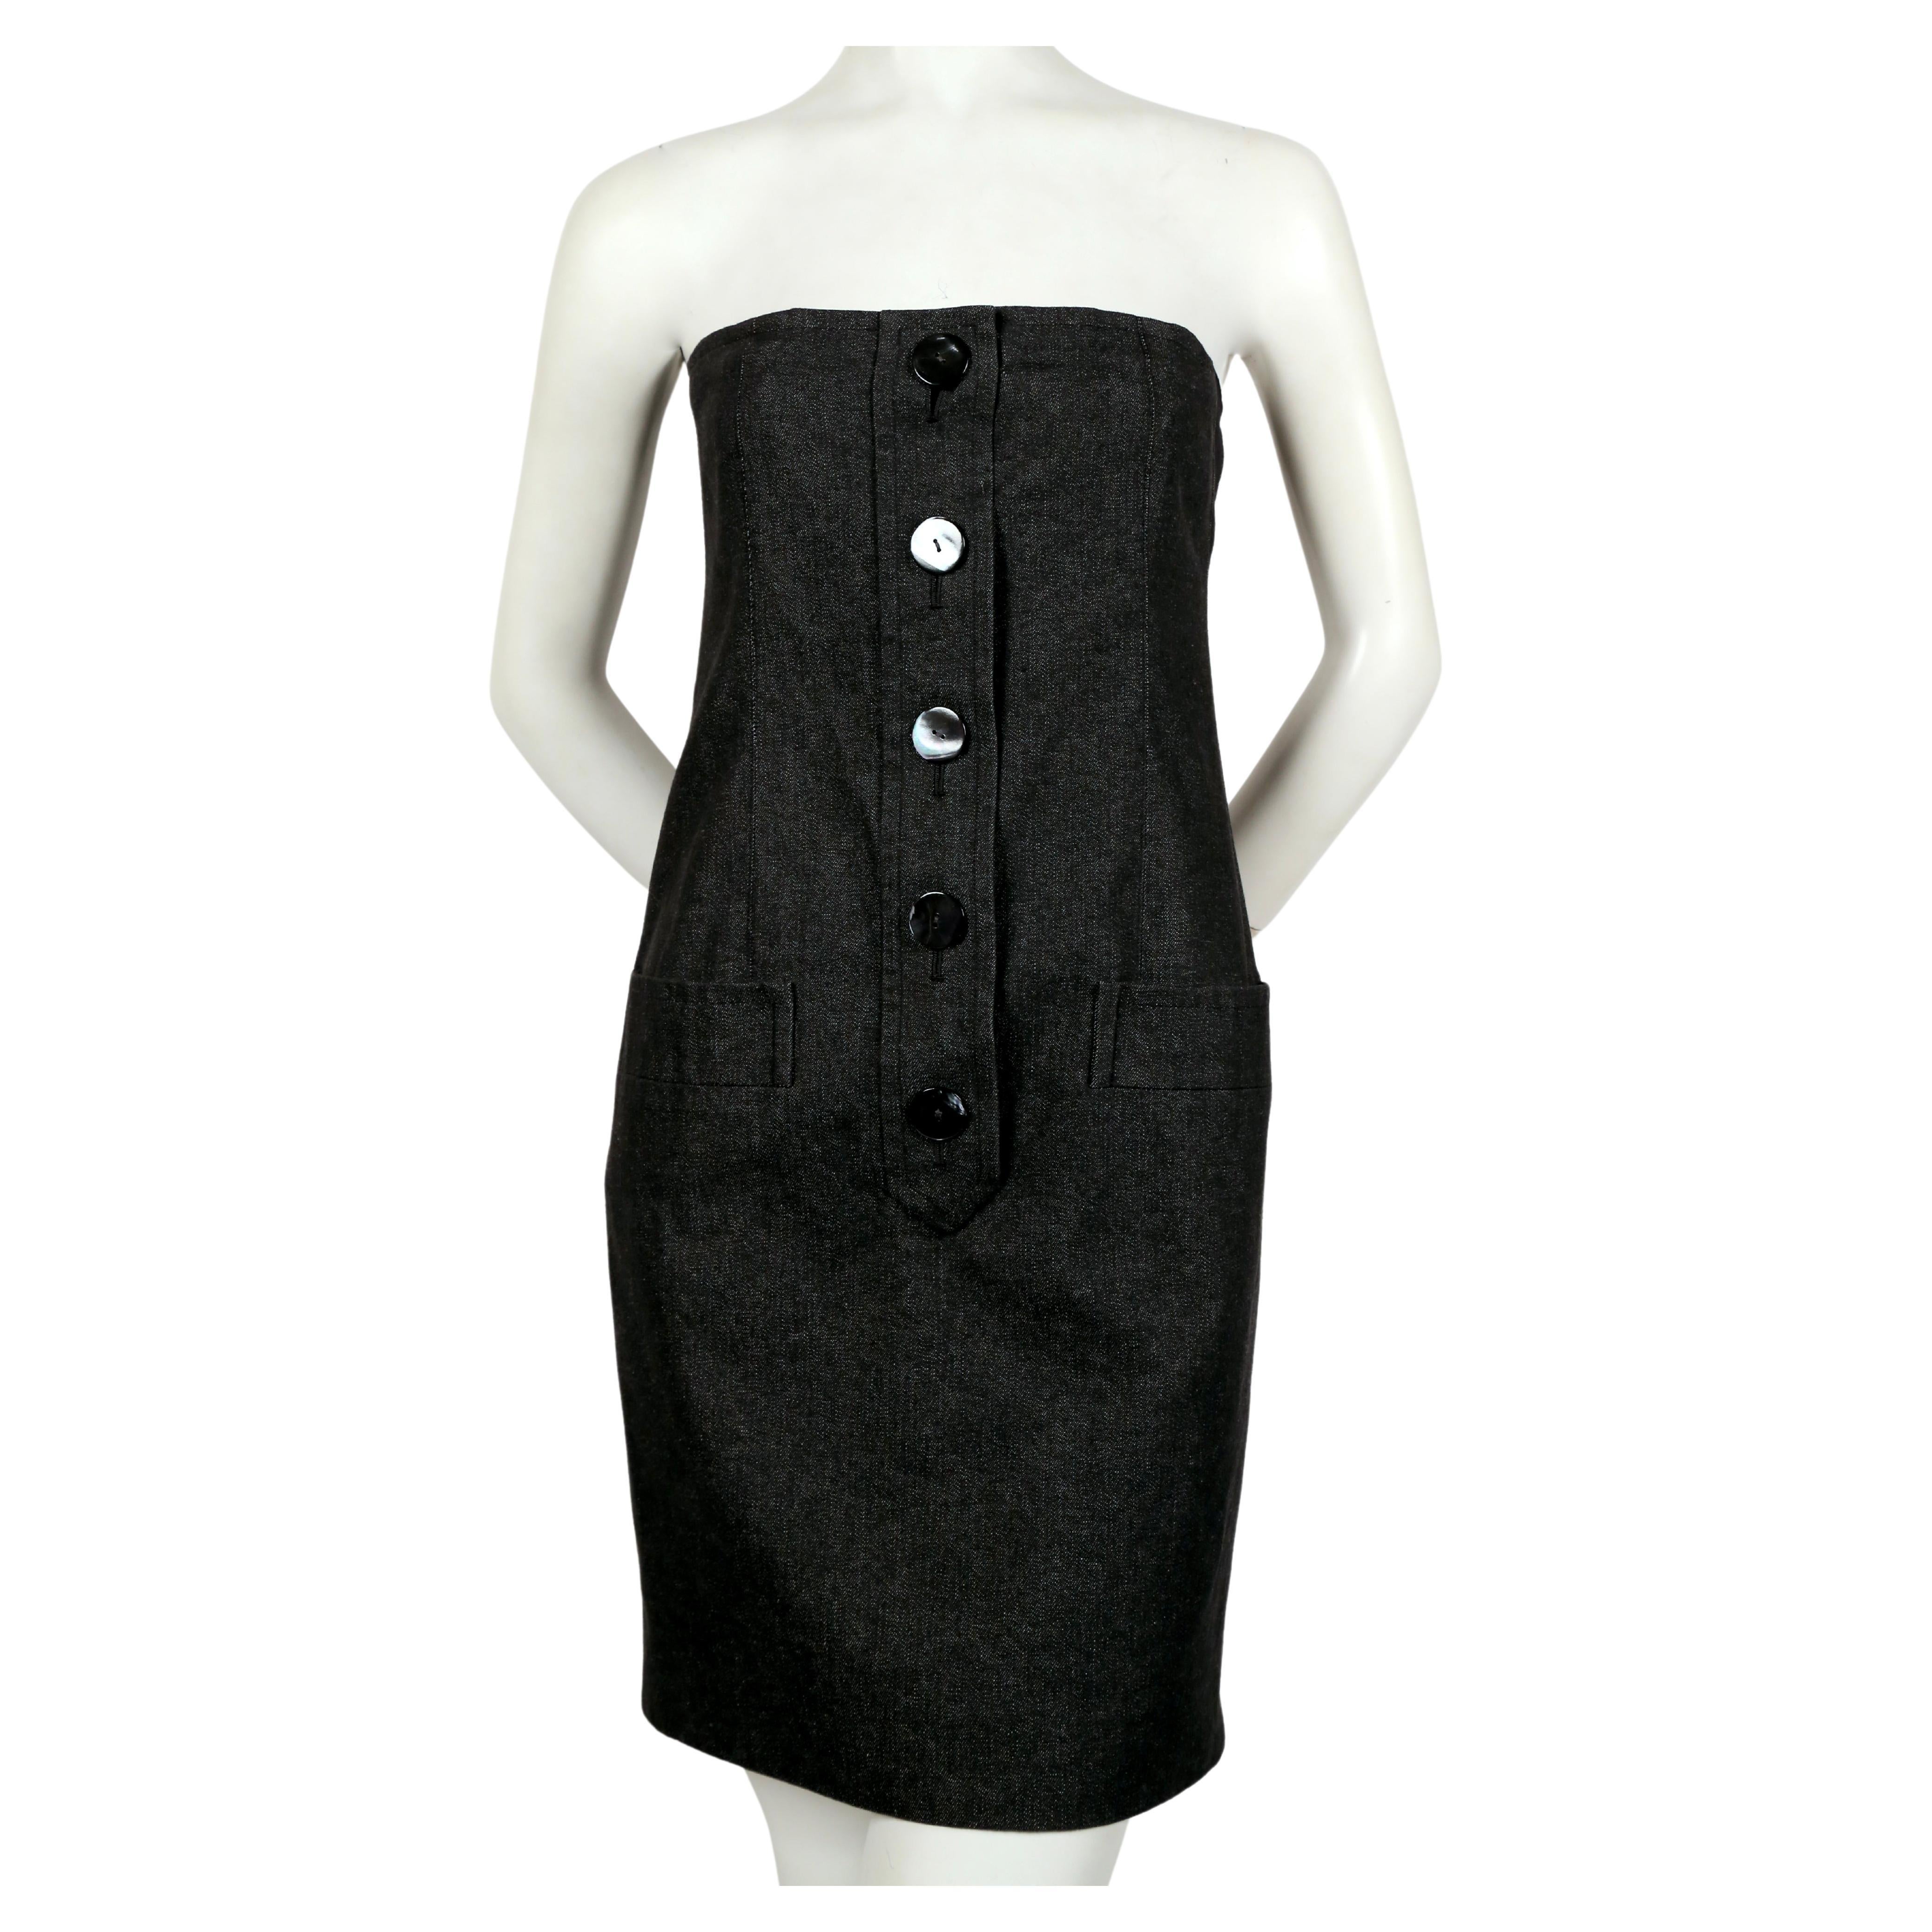 Strapless, black denim dress with oversized shell buttons and horizontal pockets at hips from Yves Saint Laurent dating to the late 1980's, early 1990's. No size is indicated however this best fits a US 2 or 4. Approximate measurements: bust 30